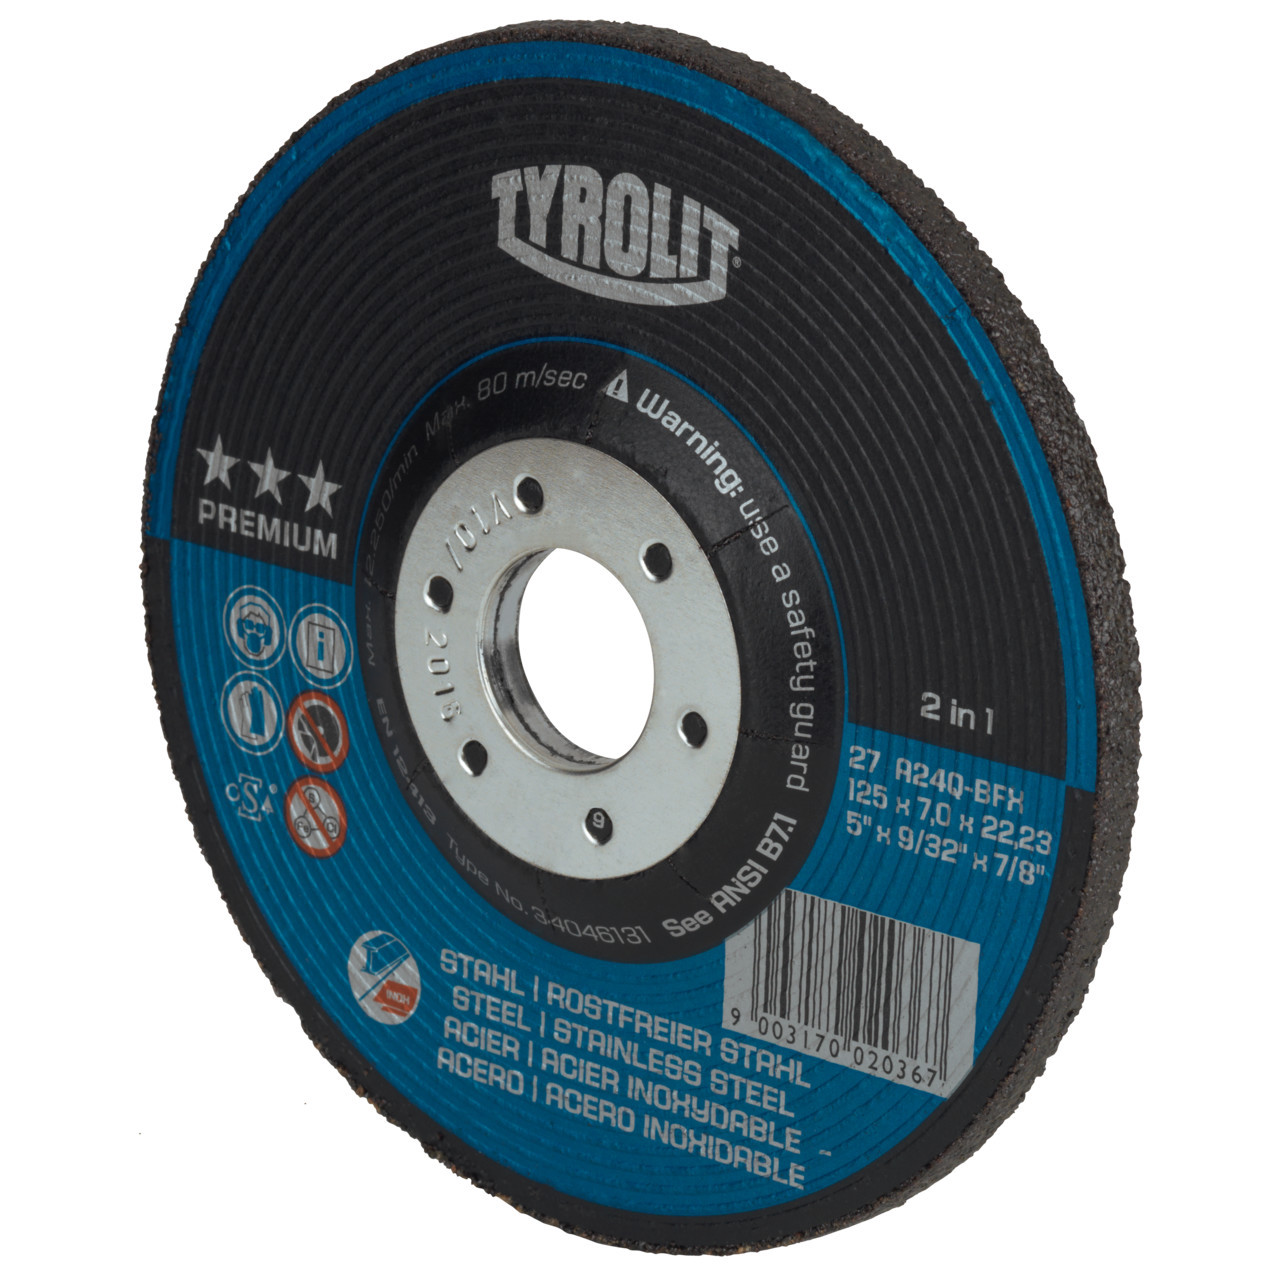 Tyrolit Roughing disc DxUxH 230x4x22.23 2in1 for steel and stainless steel, shape: 27 - offset version, Art. 5406